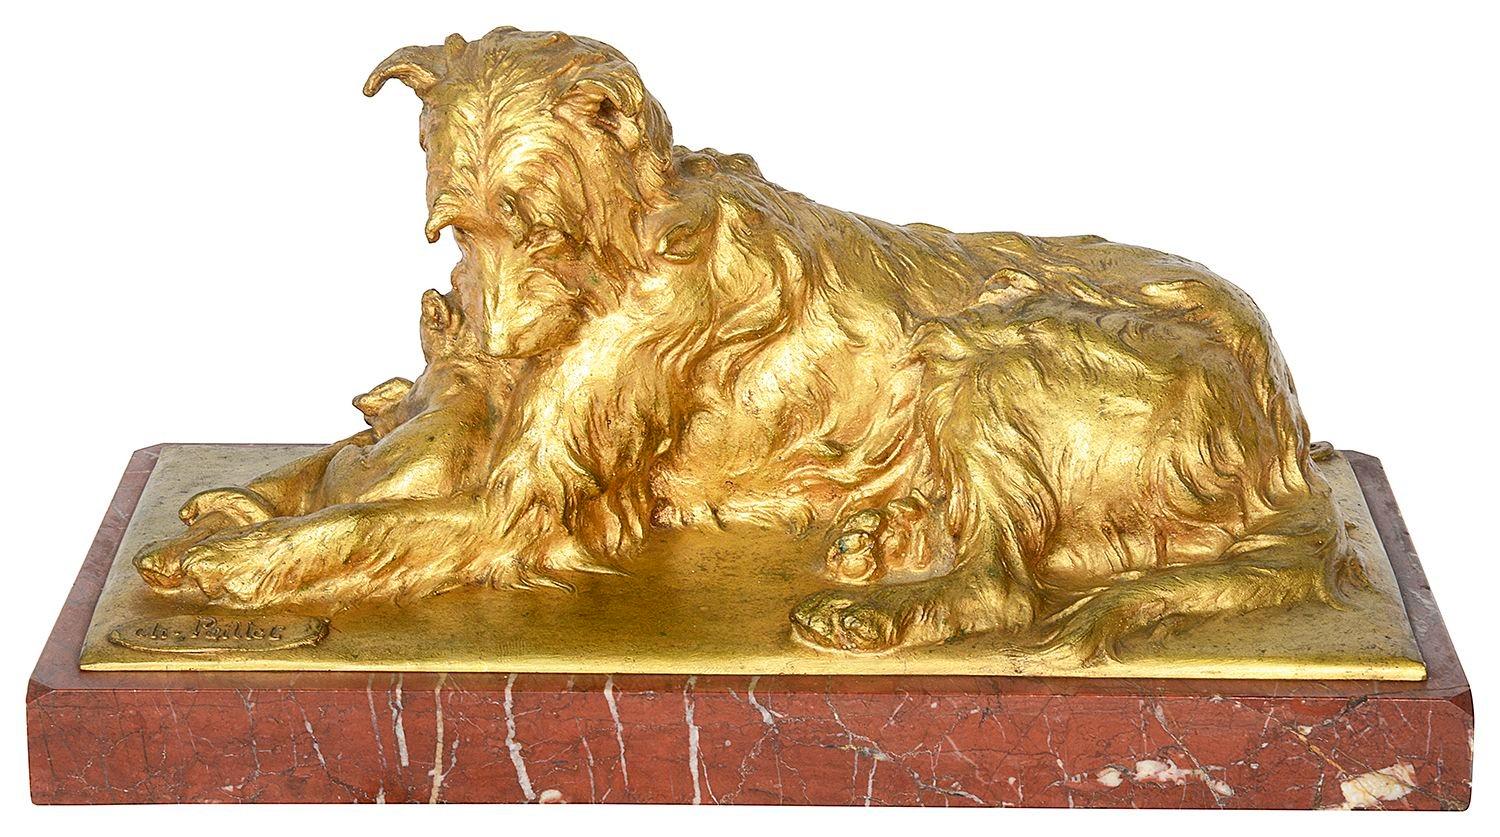 An enchanting gilded bronze sculpture of an Irish Wolfhound with Cat, set on a rouge marble base.
Signed; Charles Paillet (French, 1871 ~ 1937)
Batch 75 62103. ANKZ